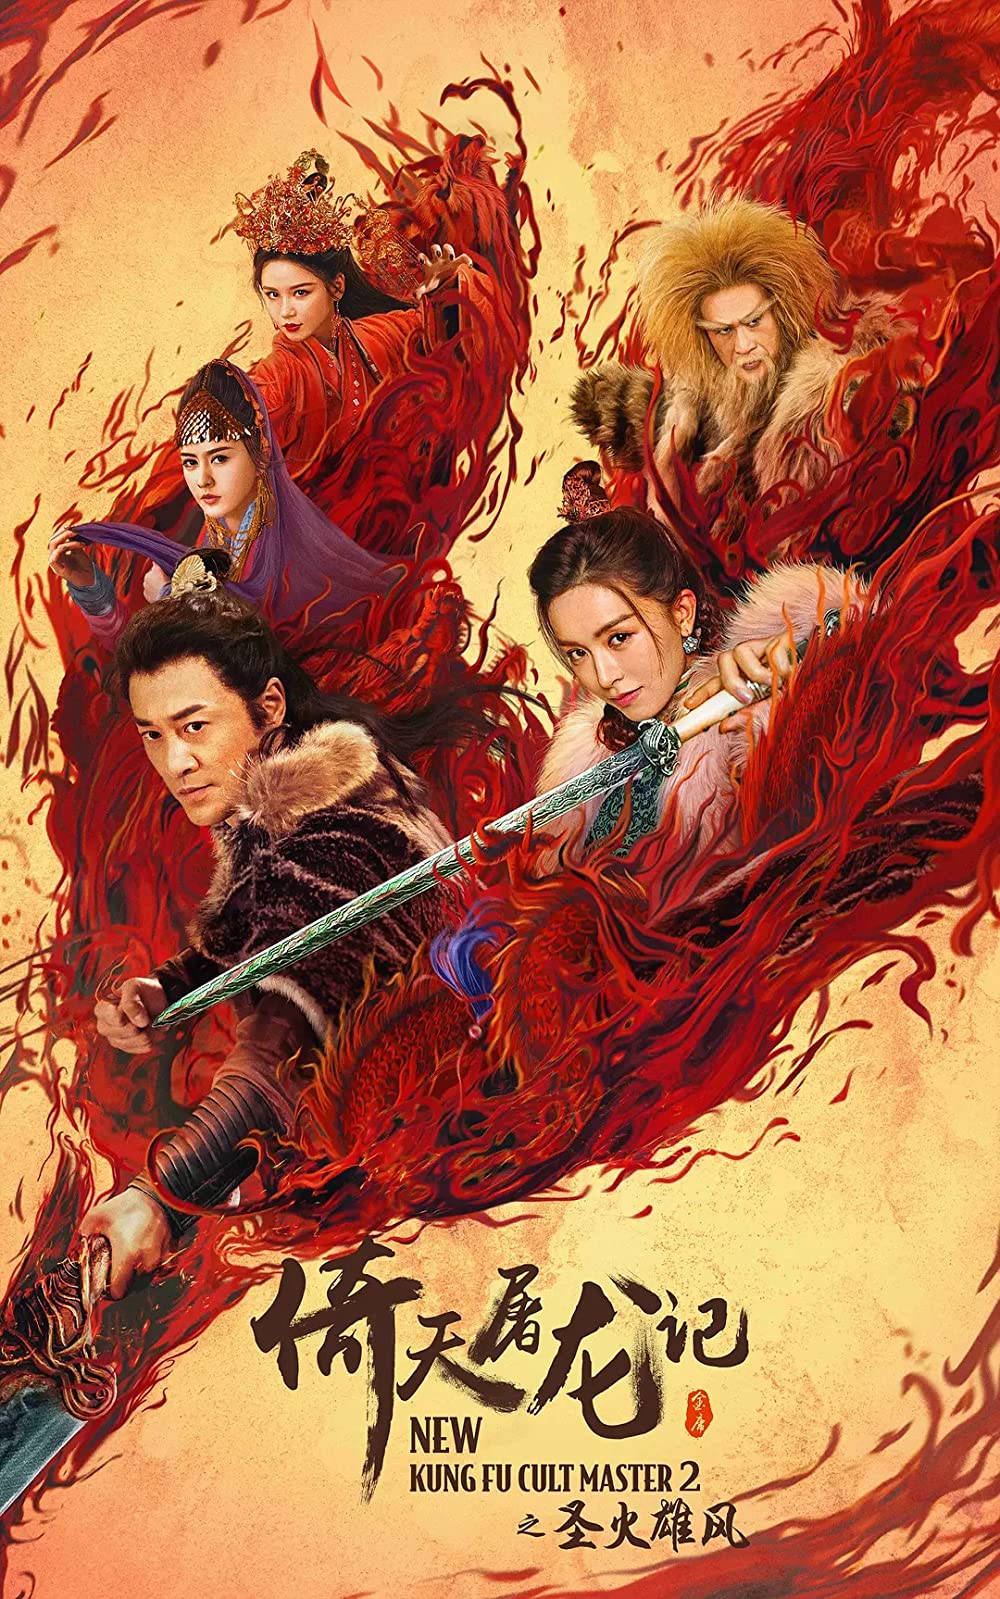 New Kung Fu Cult Master 2 2022 Chinese Movie 720p HDRip ESub 850MB Download